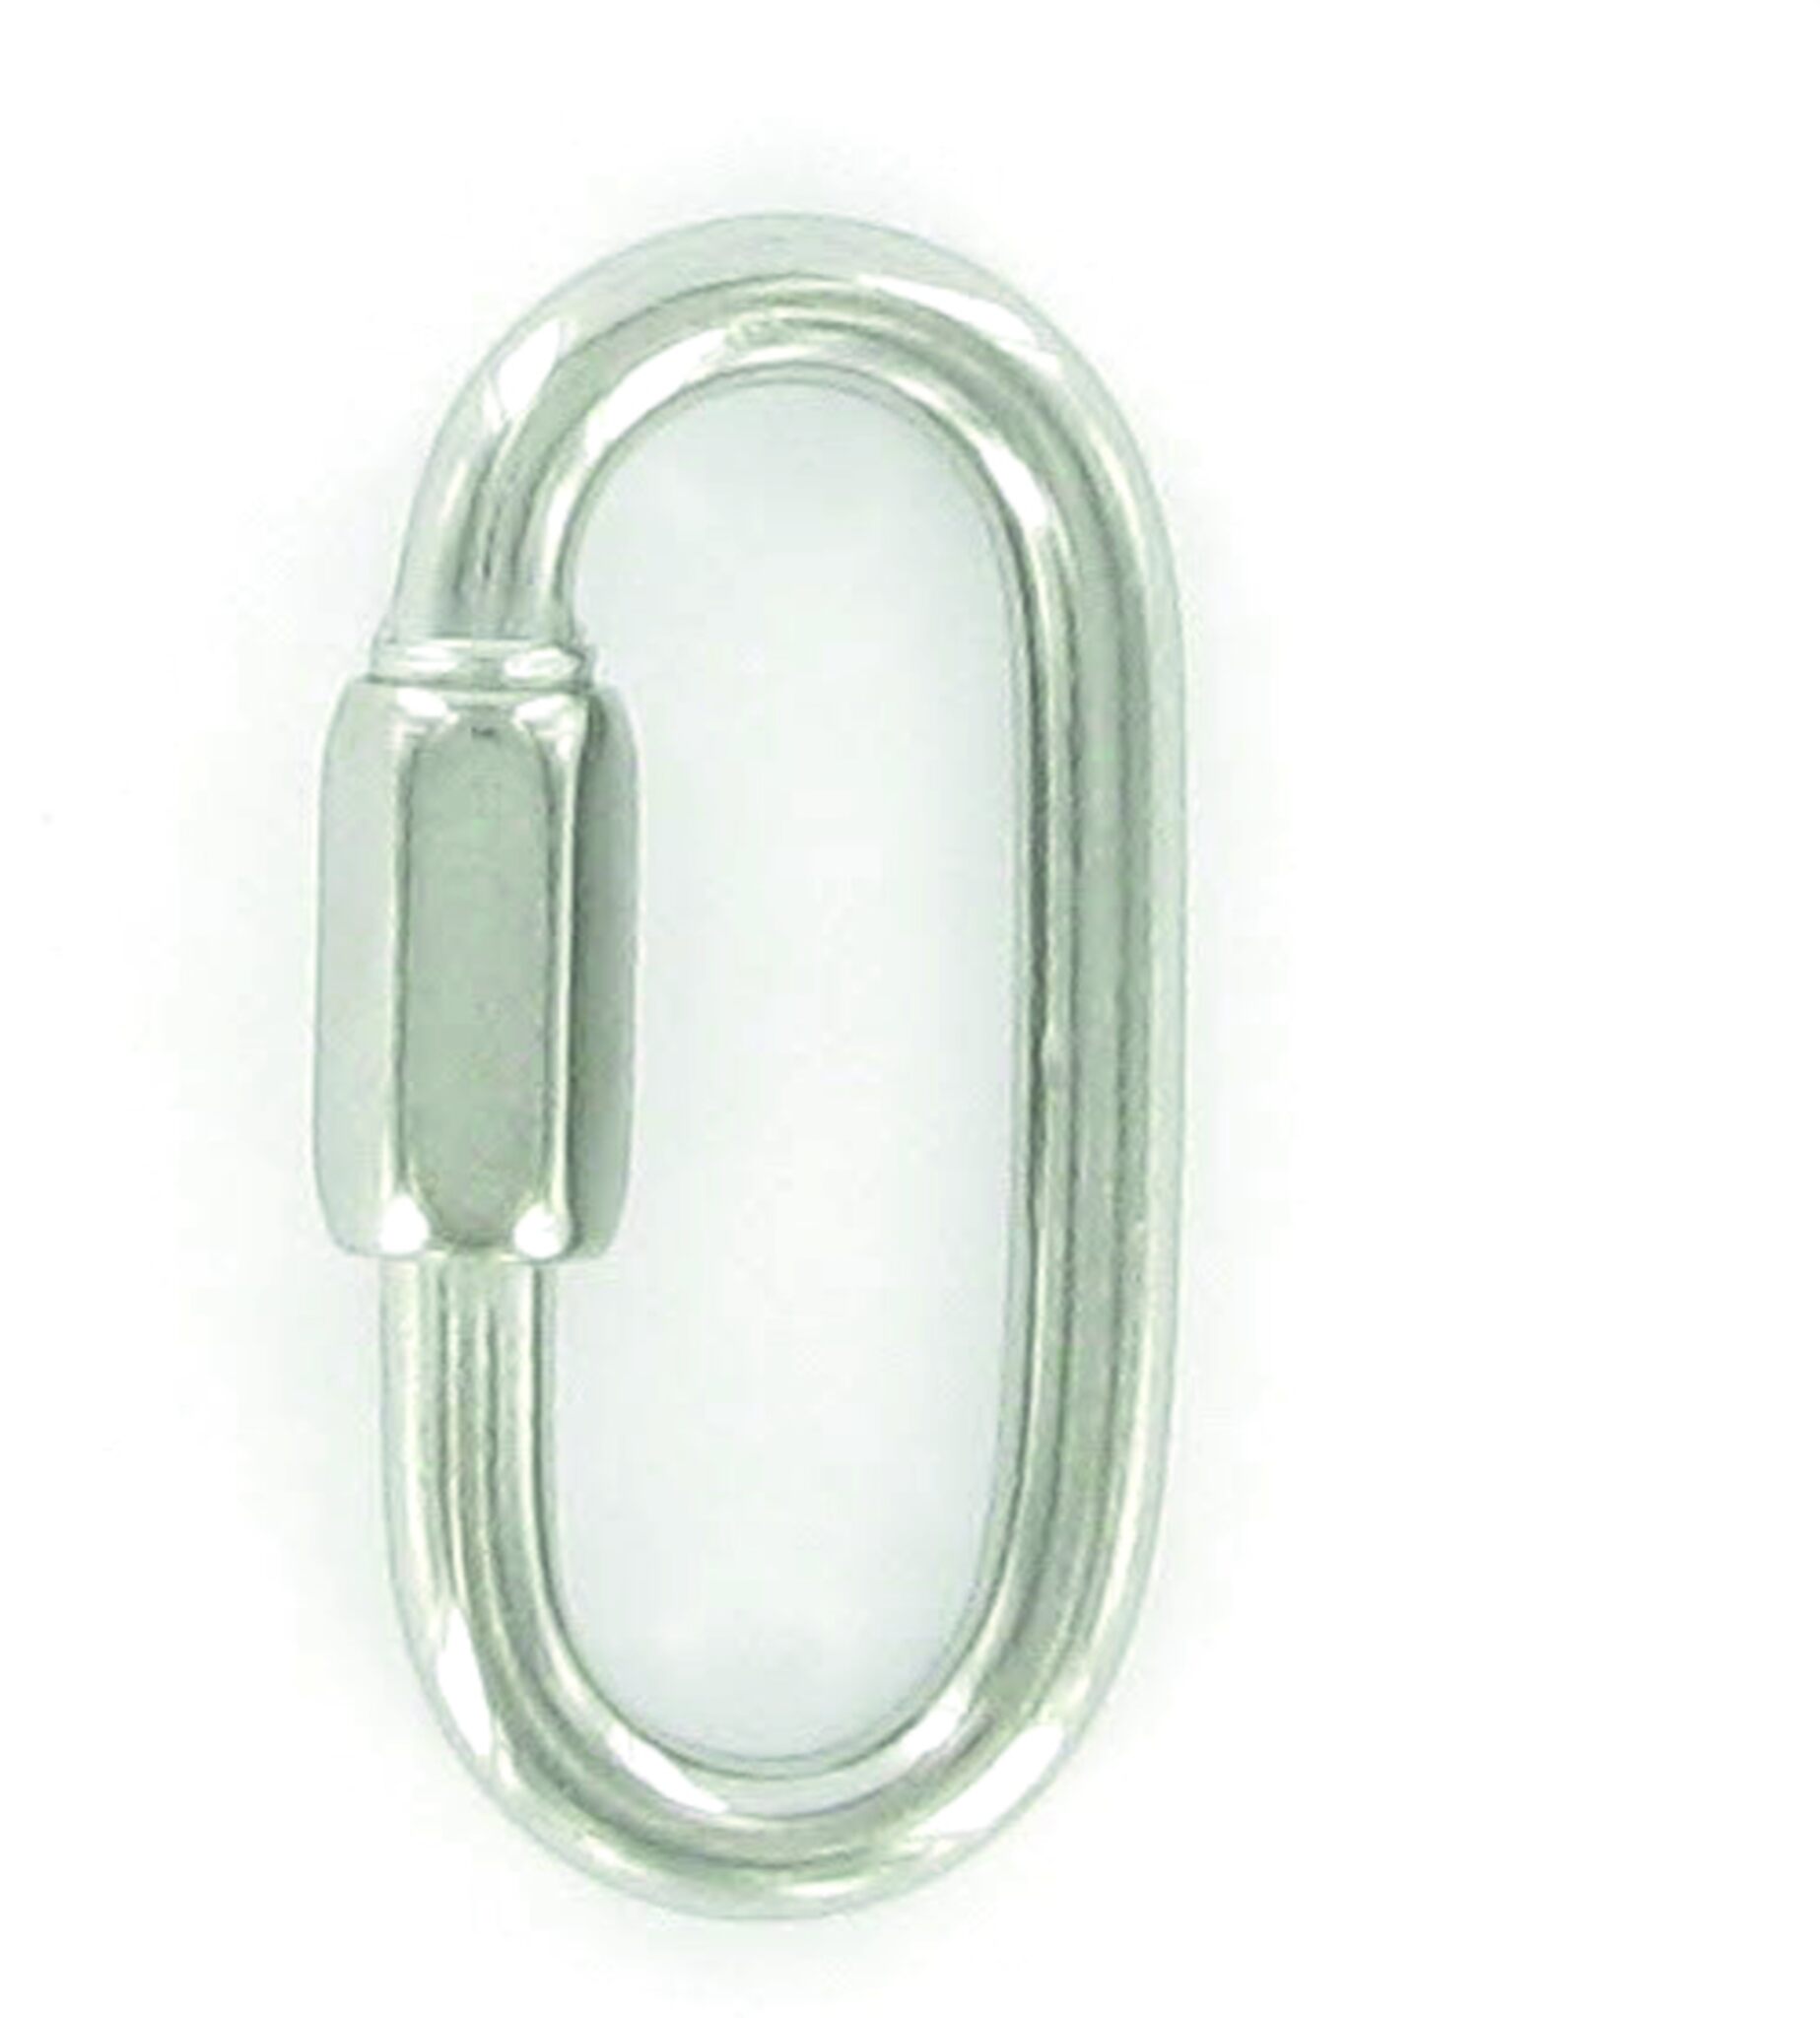 Shackle stainless steel